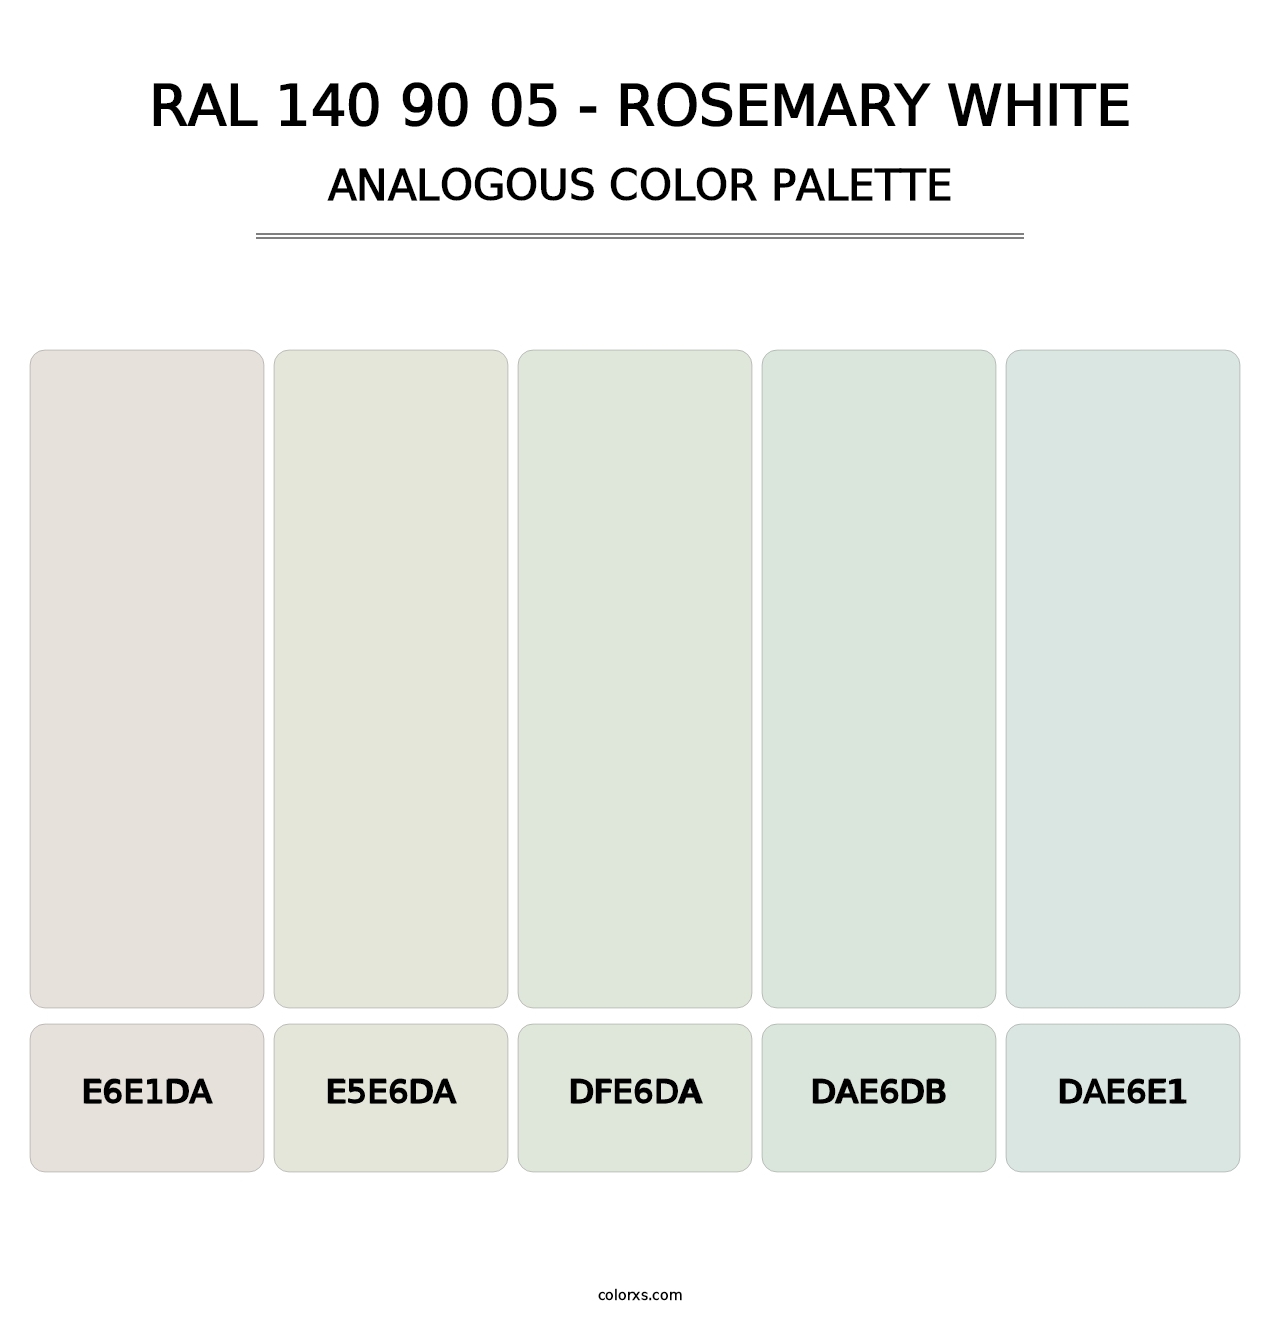 RAL 140 90 05 - Rosemary White - Analogous Color Palette